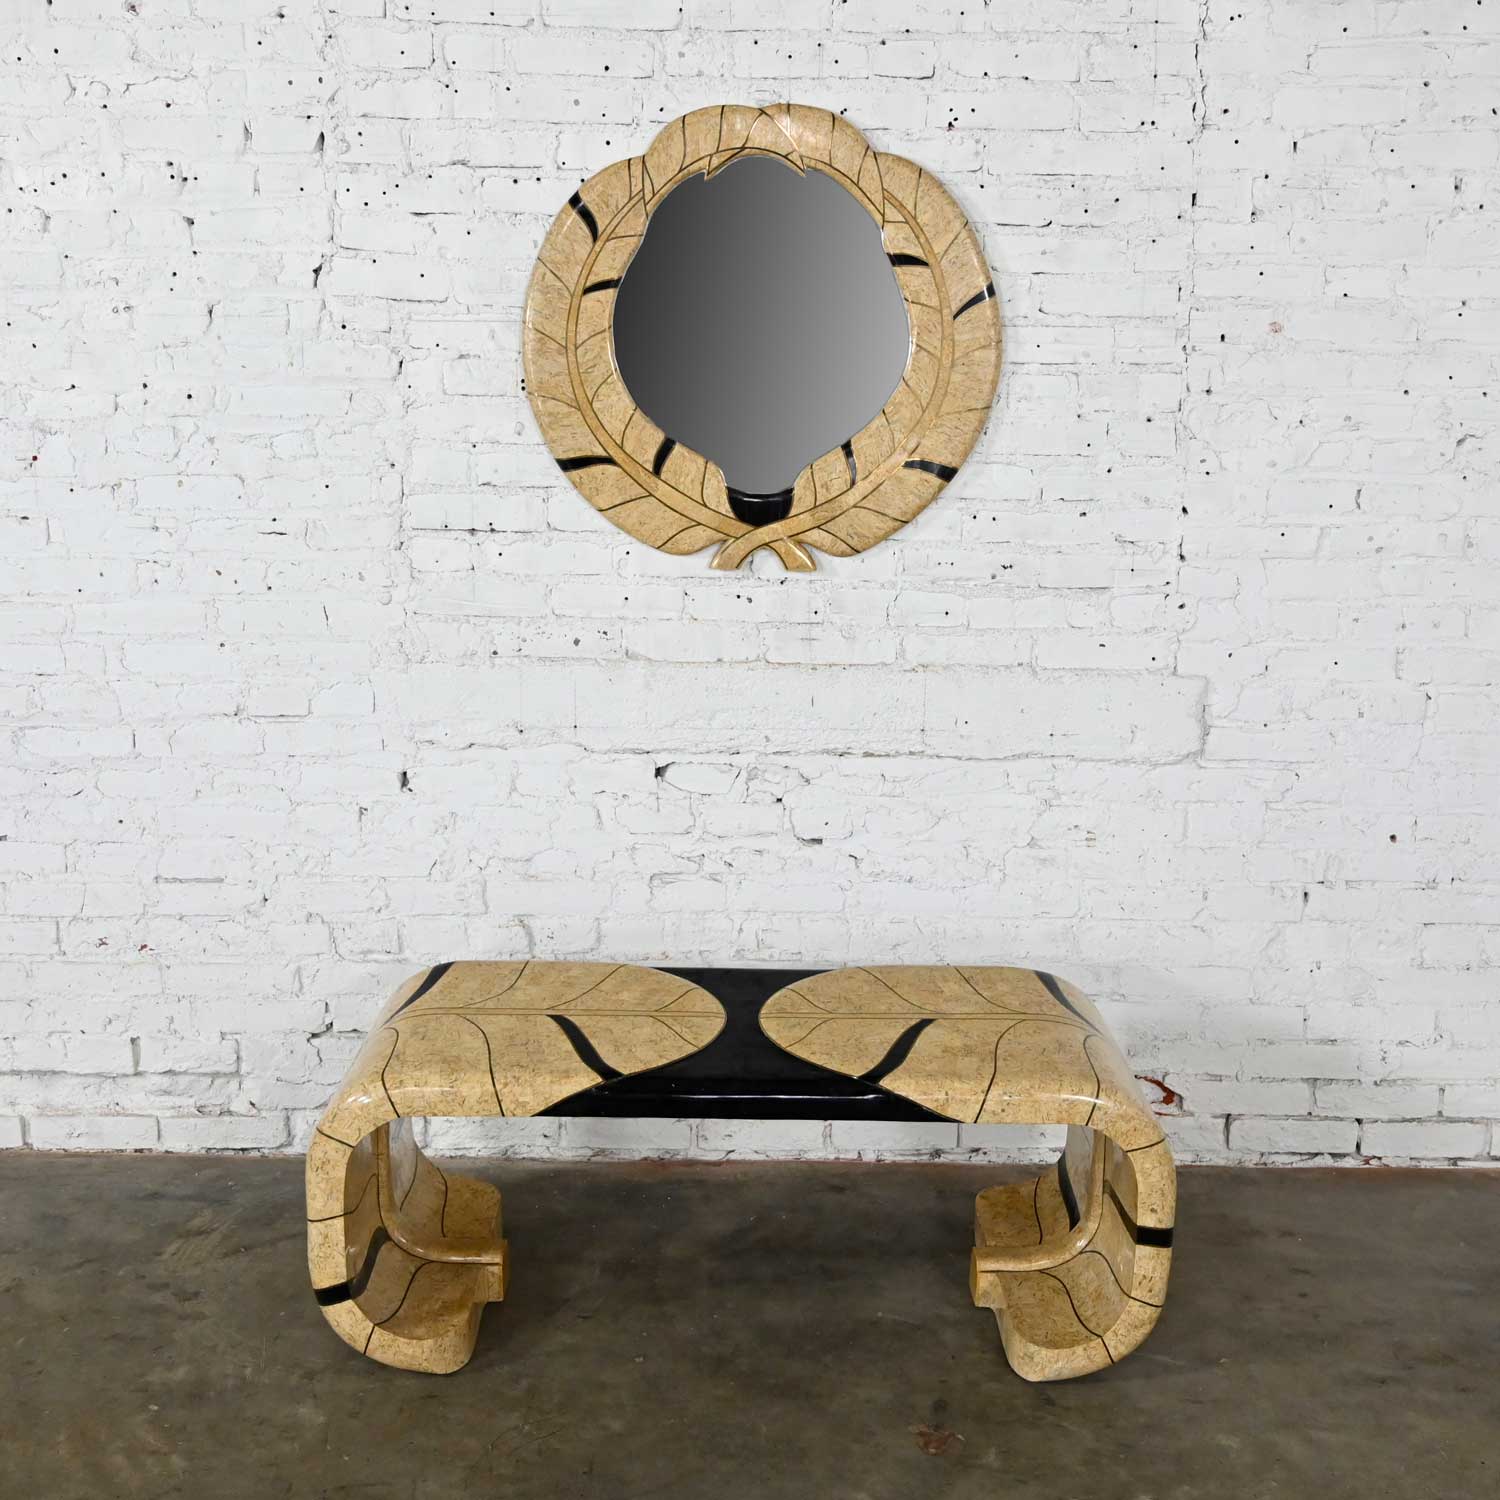 Art Deco Revival Tessellated Marble Low Console Table & Mirror Style of Maitland Smith